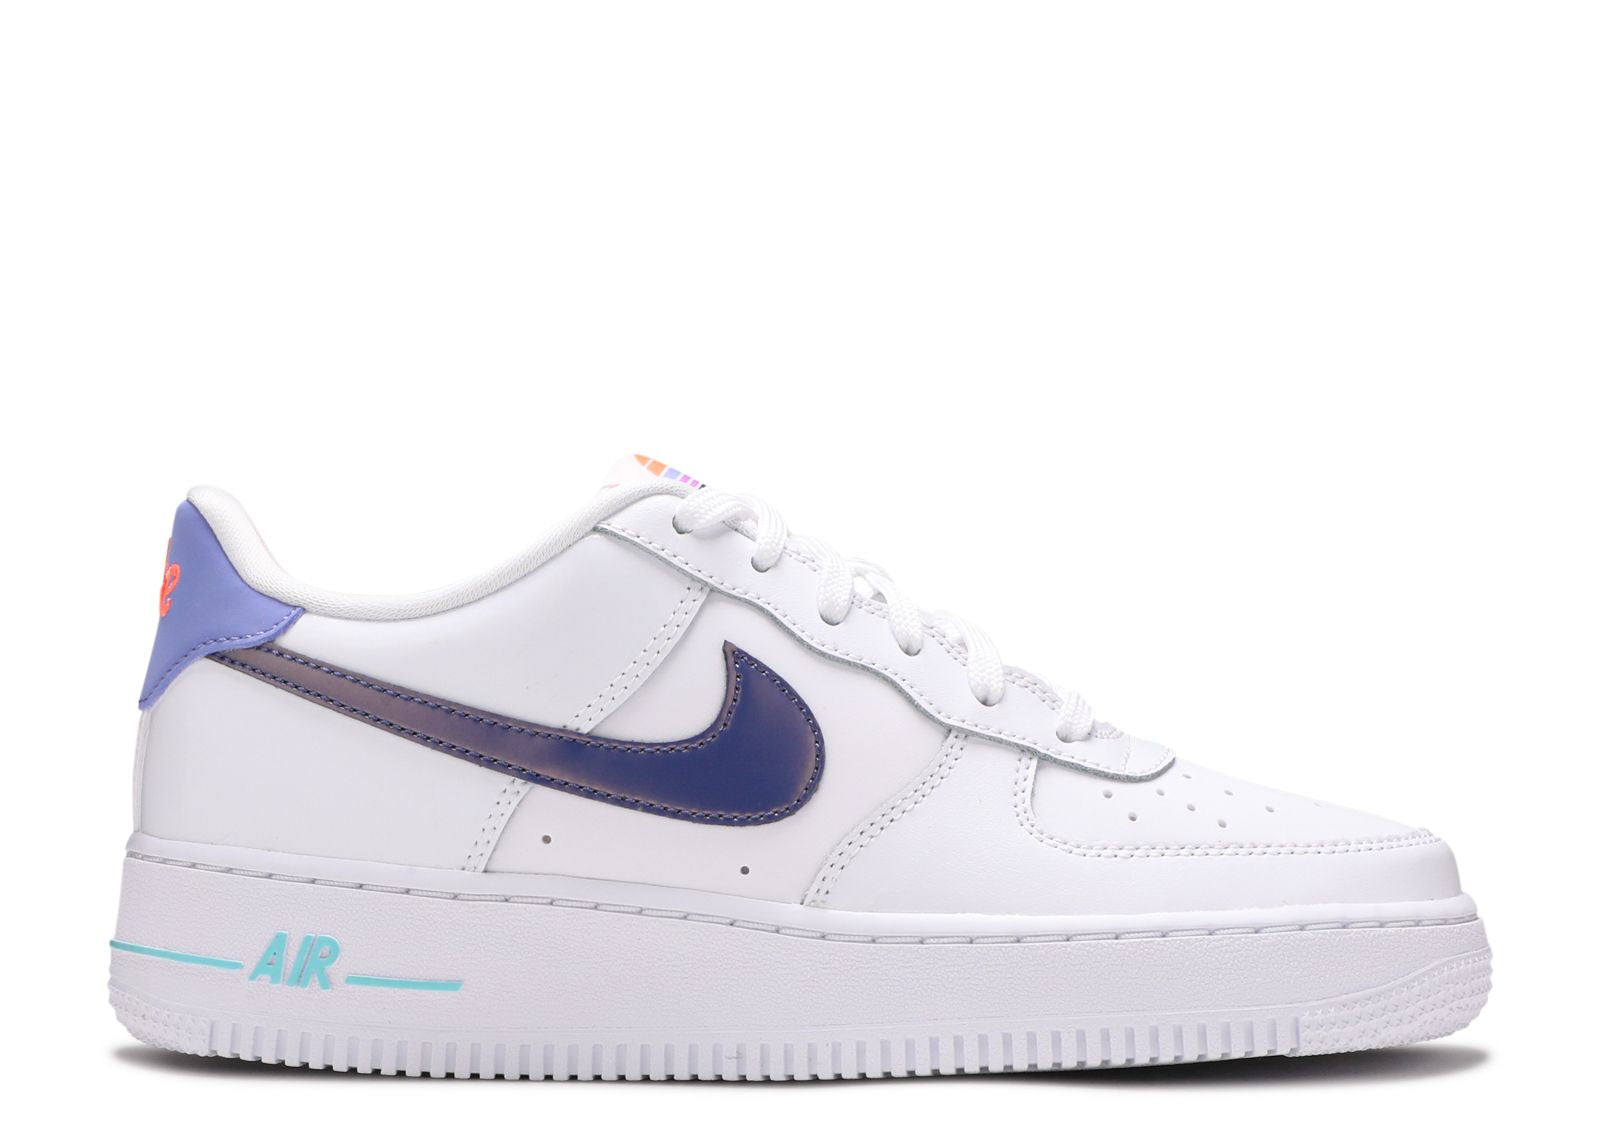 Second Chance - Nike Air Force 1 White Dark Purple Dust (GS) - 38 | NEW